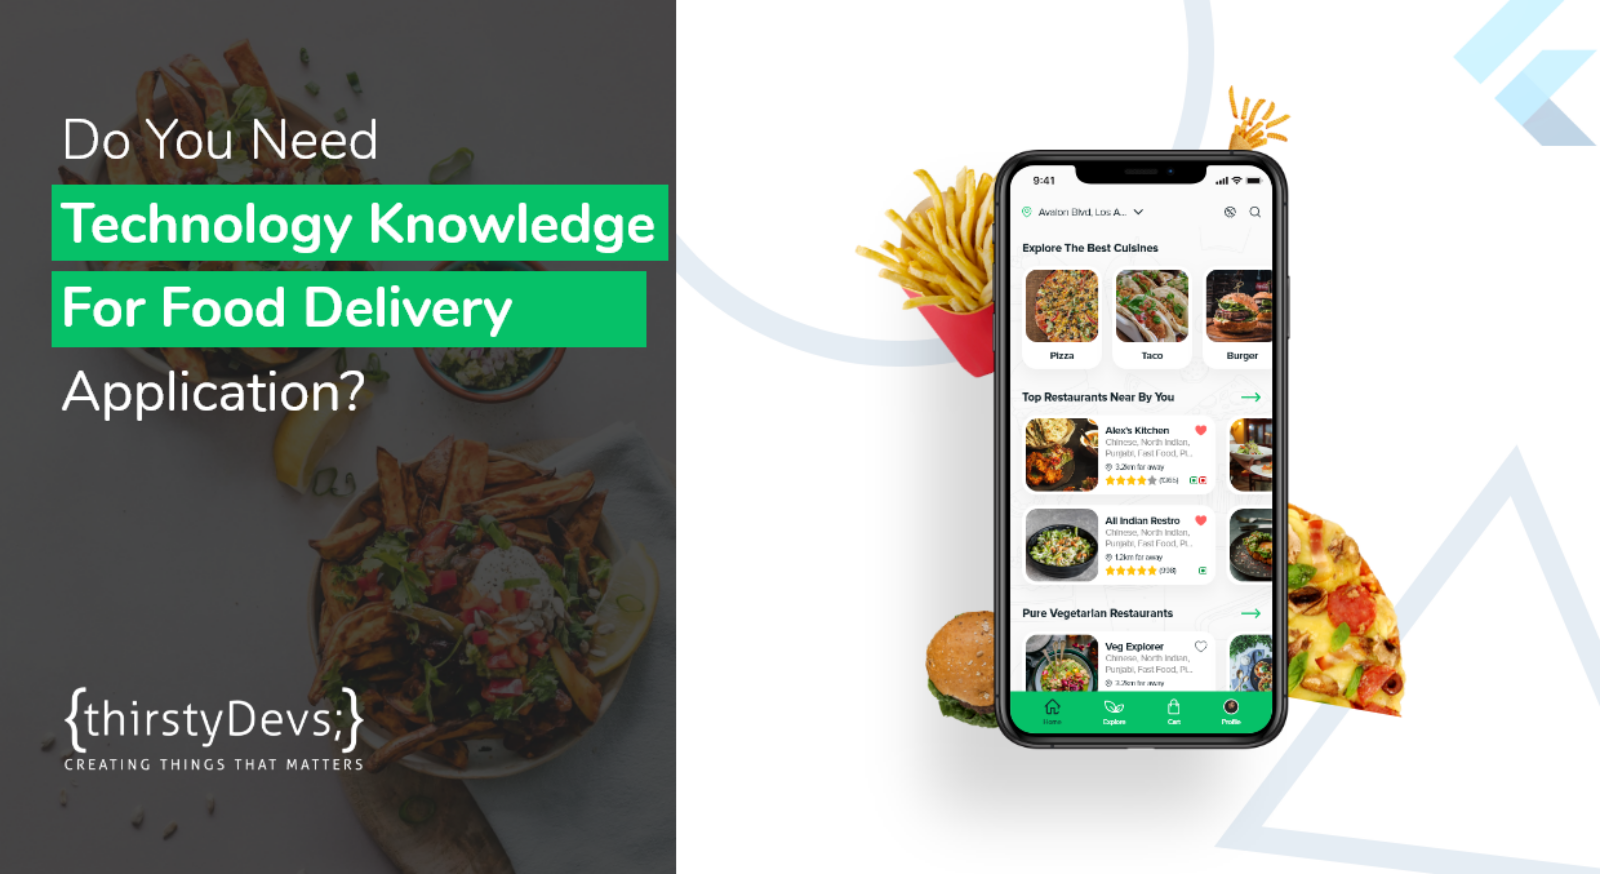 Do You Need technology knowledge for on-demand food delivery application?